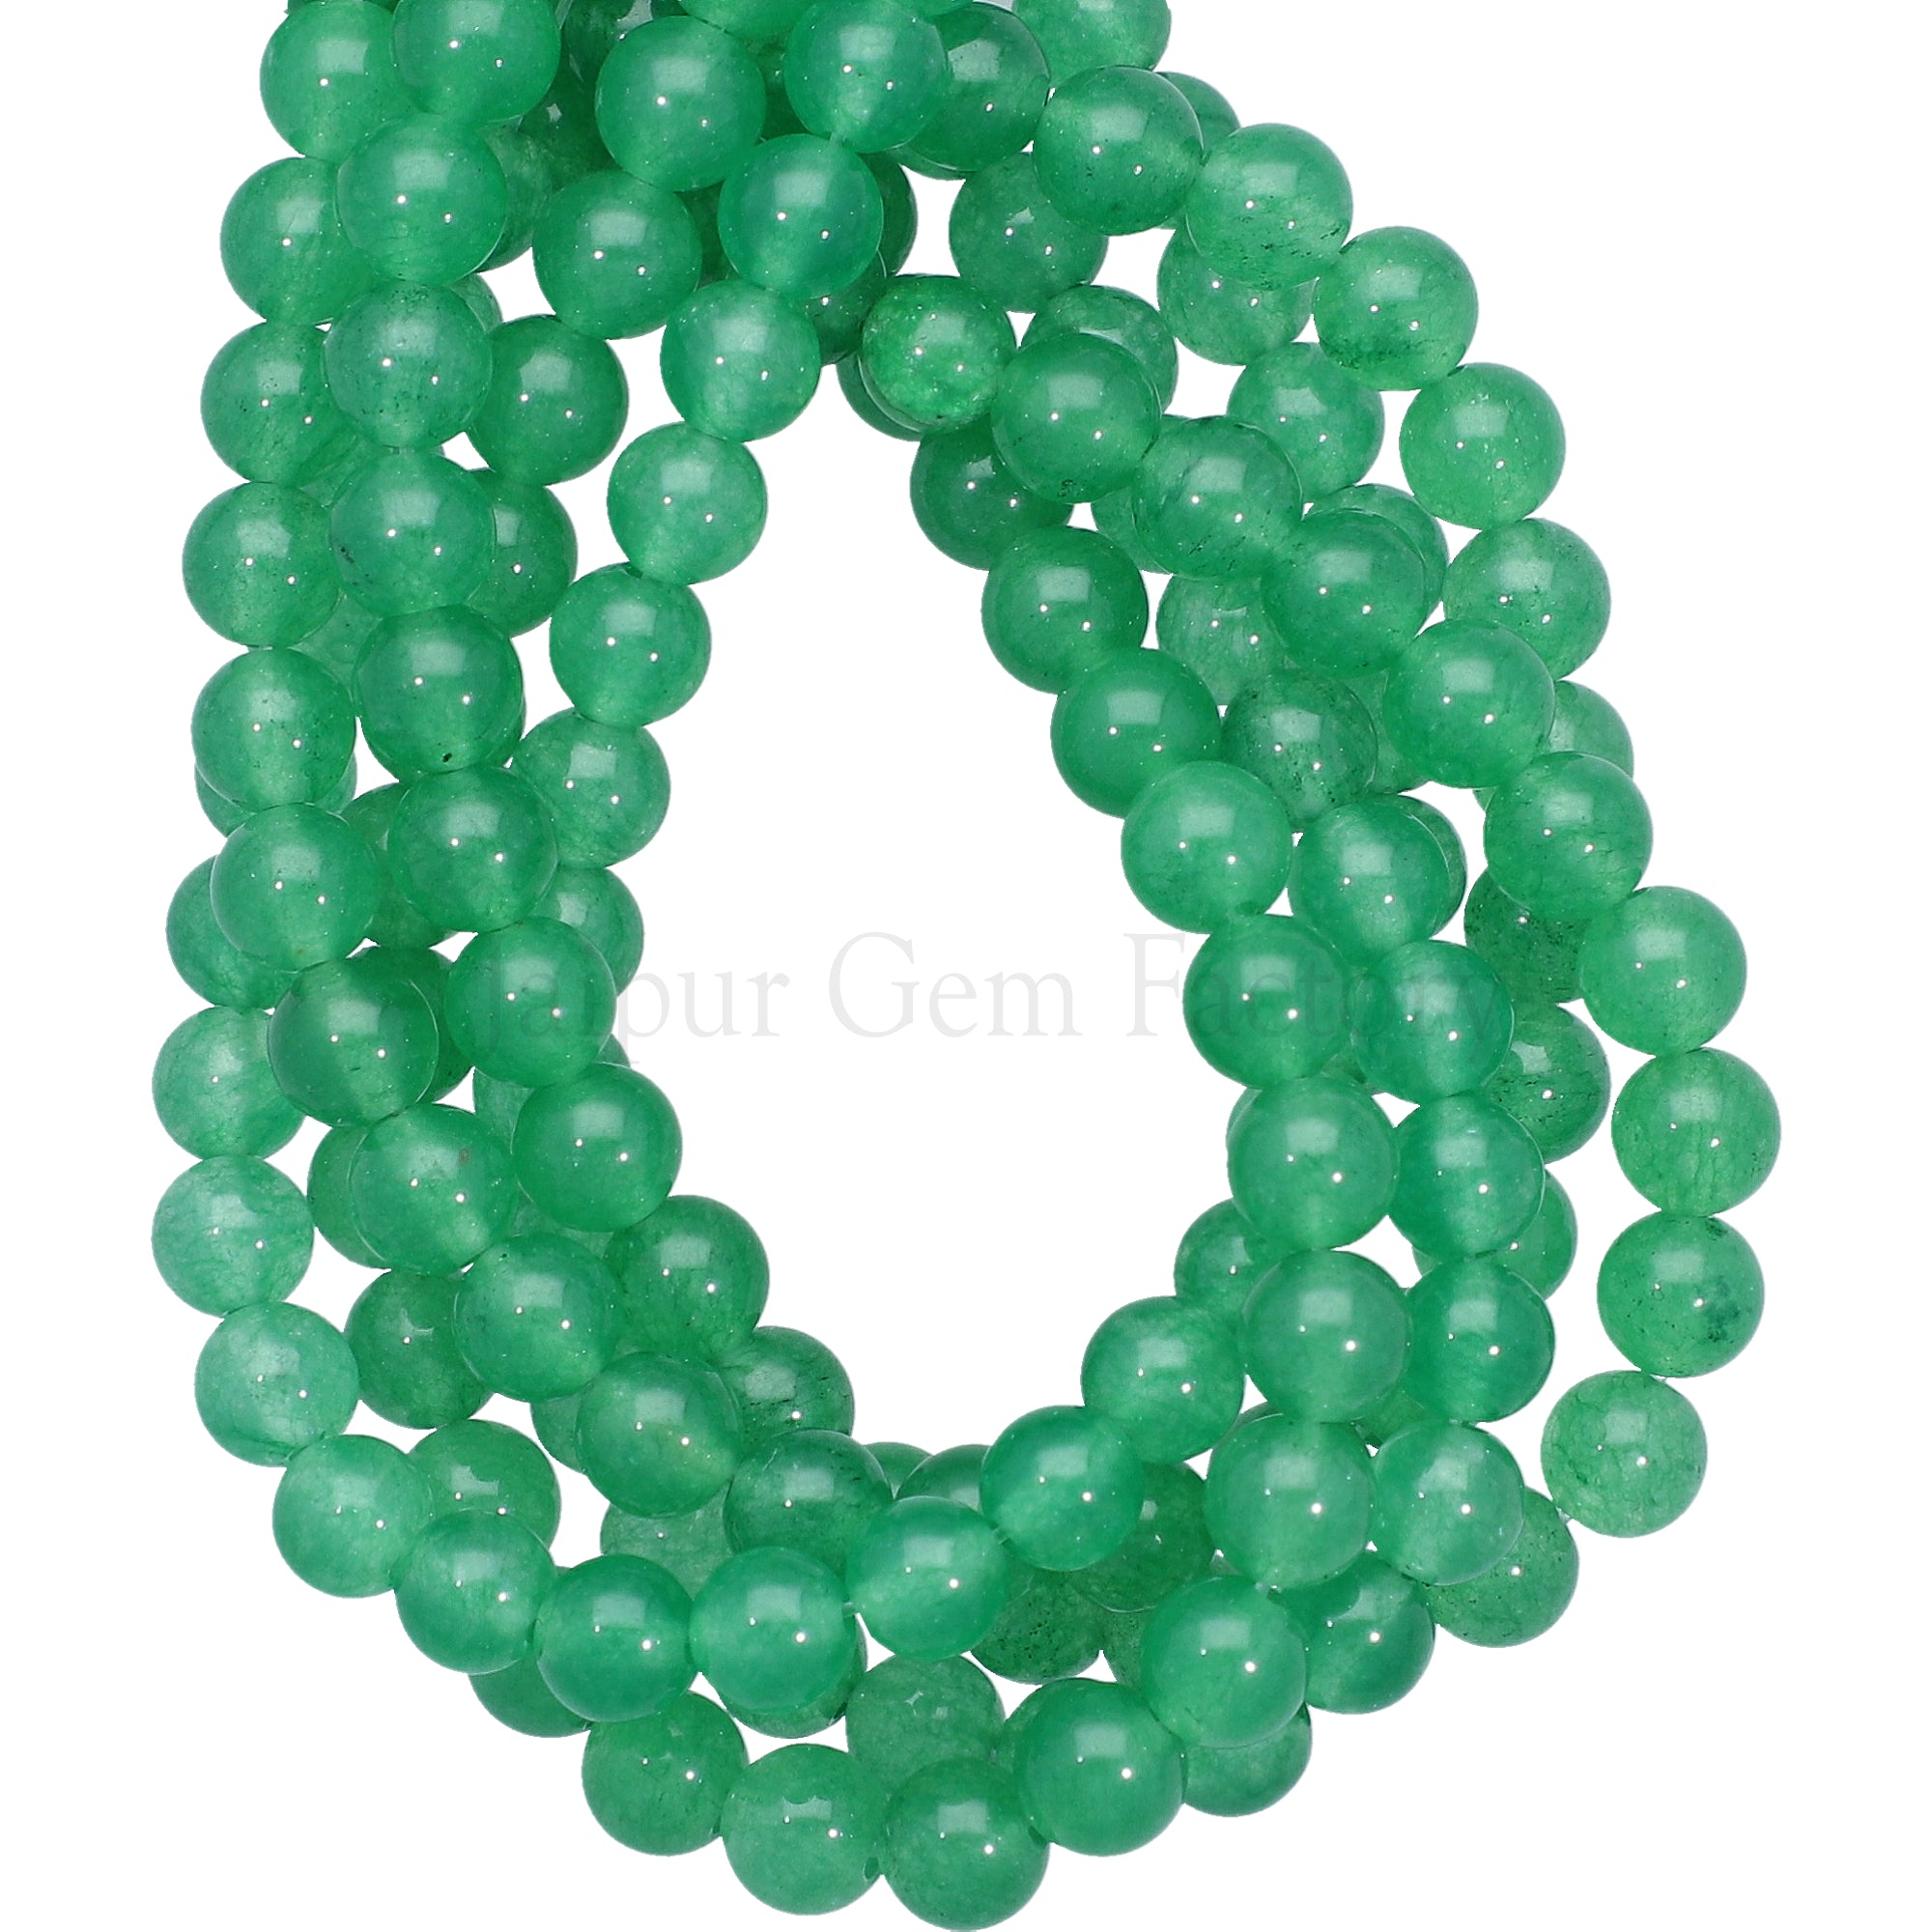 6 MM Emerald Green Jade Smooth Round Beads 15 Inches Strand